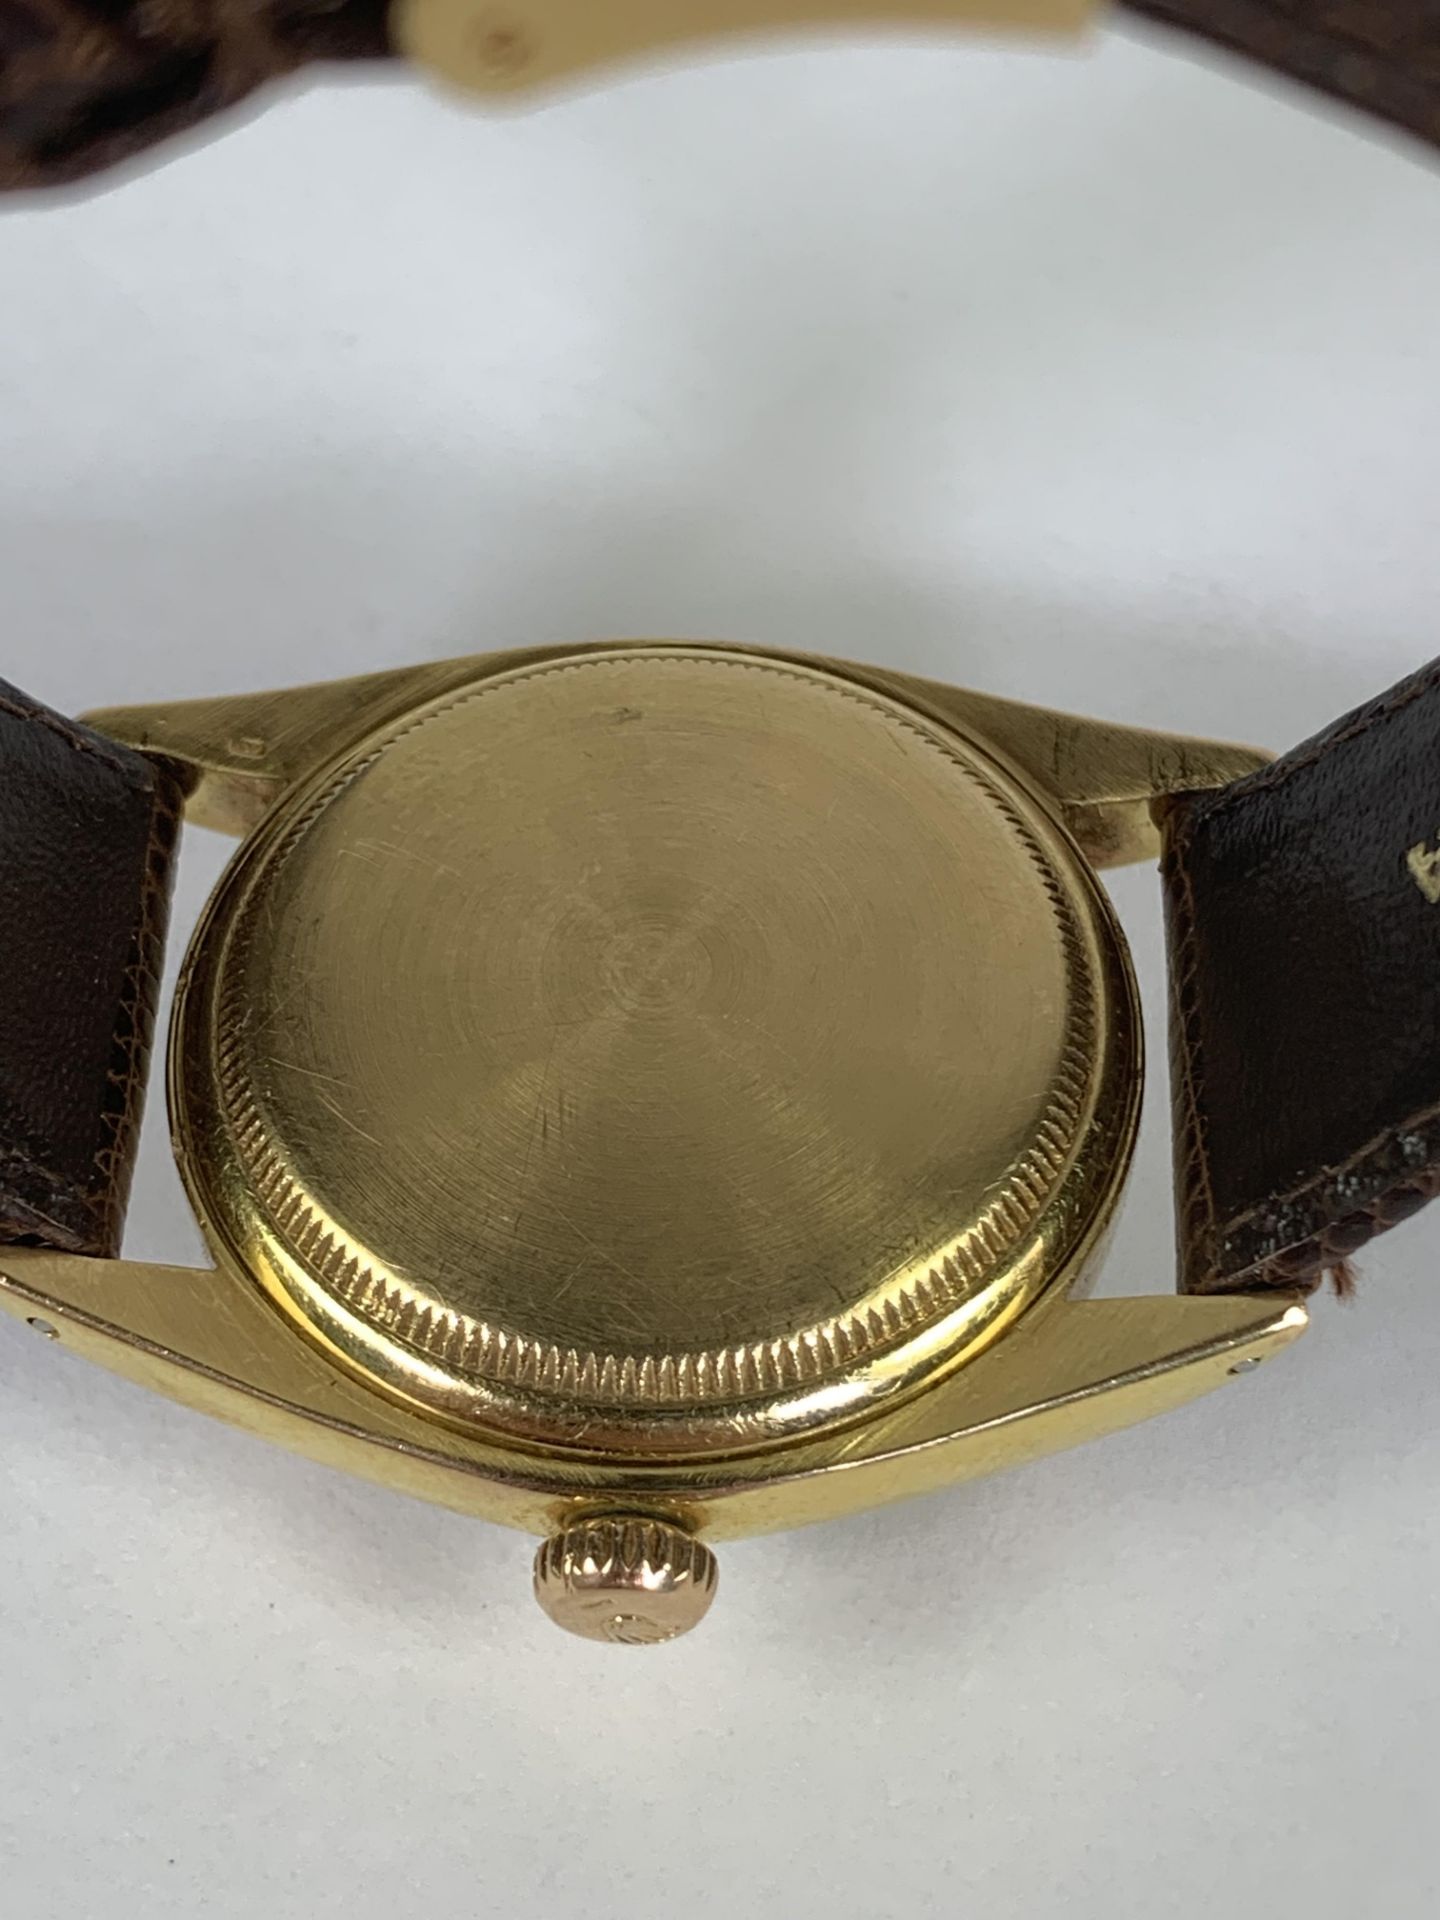 Extremely rare 1950's men's Rolex Oyster Perpetual ref 6029, crown 1951 - Image 4 of 16